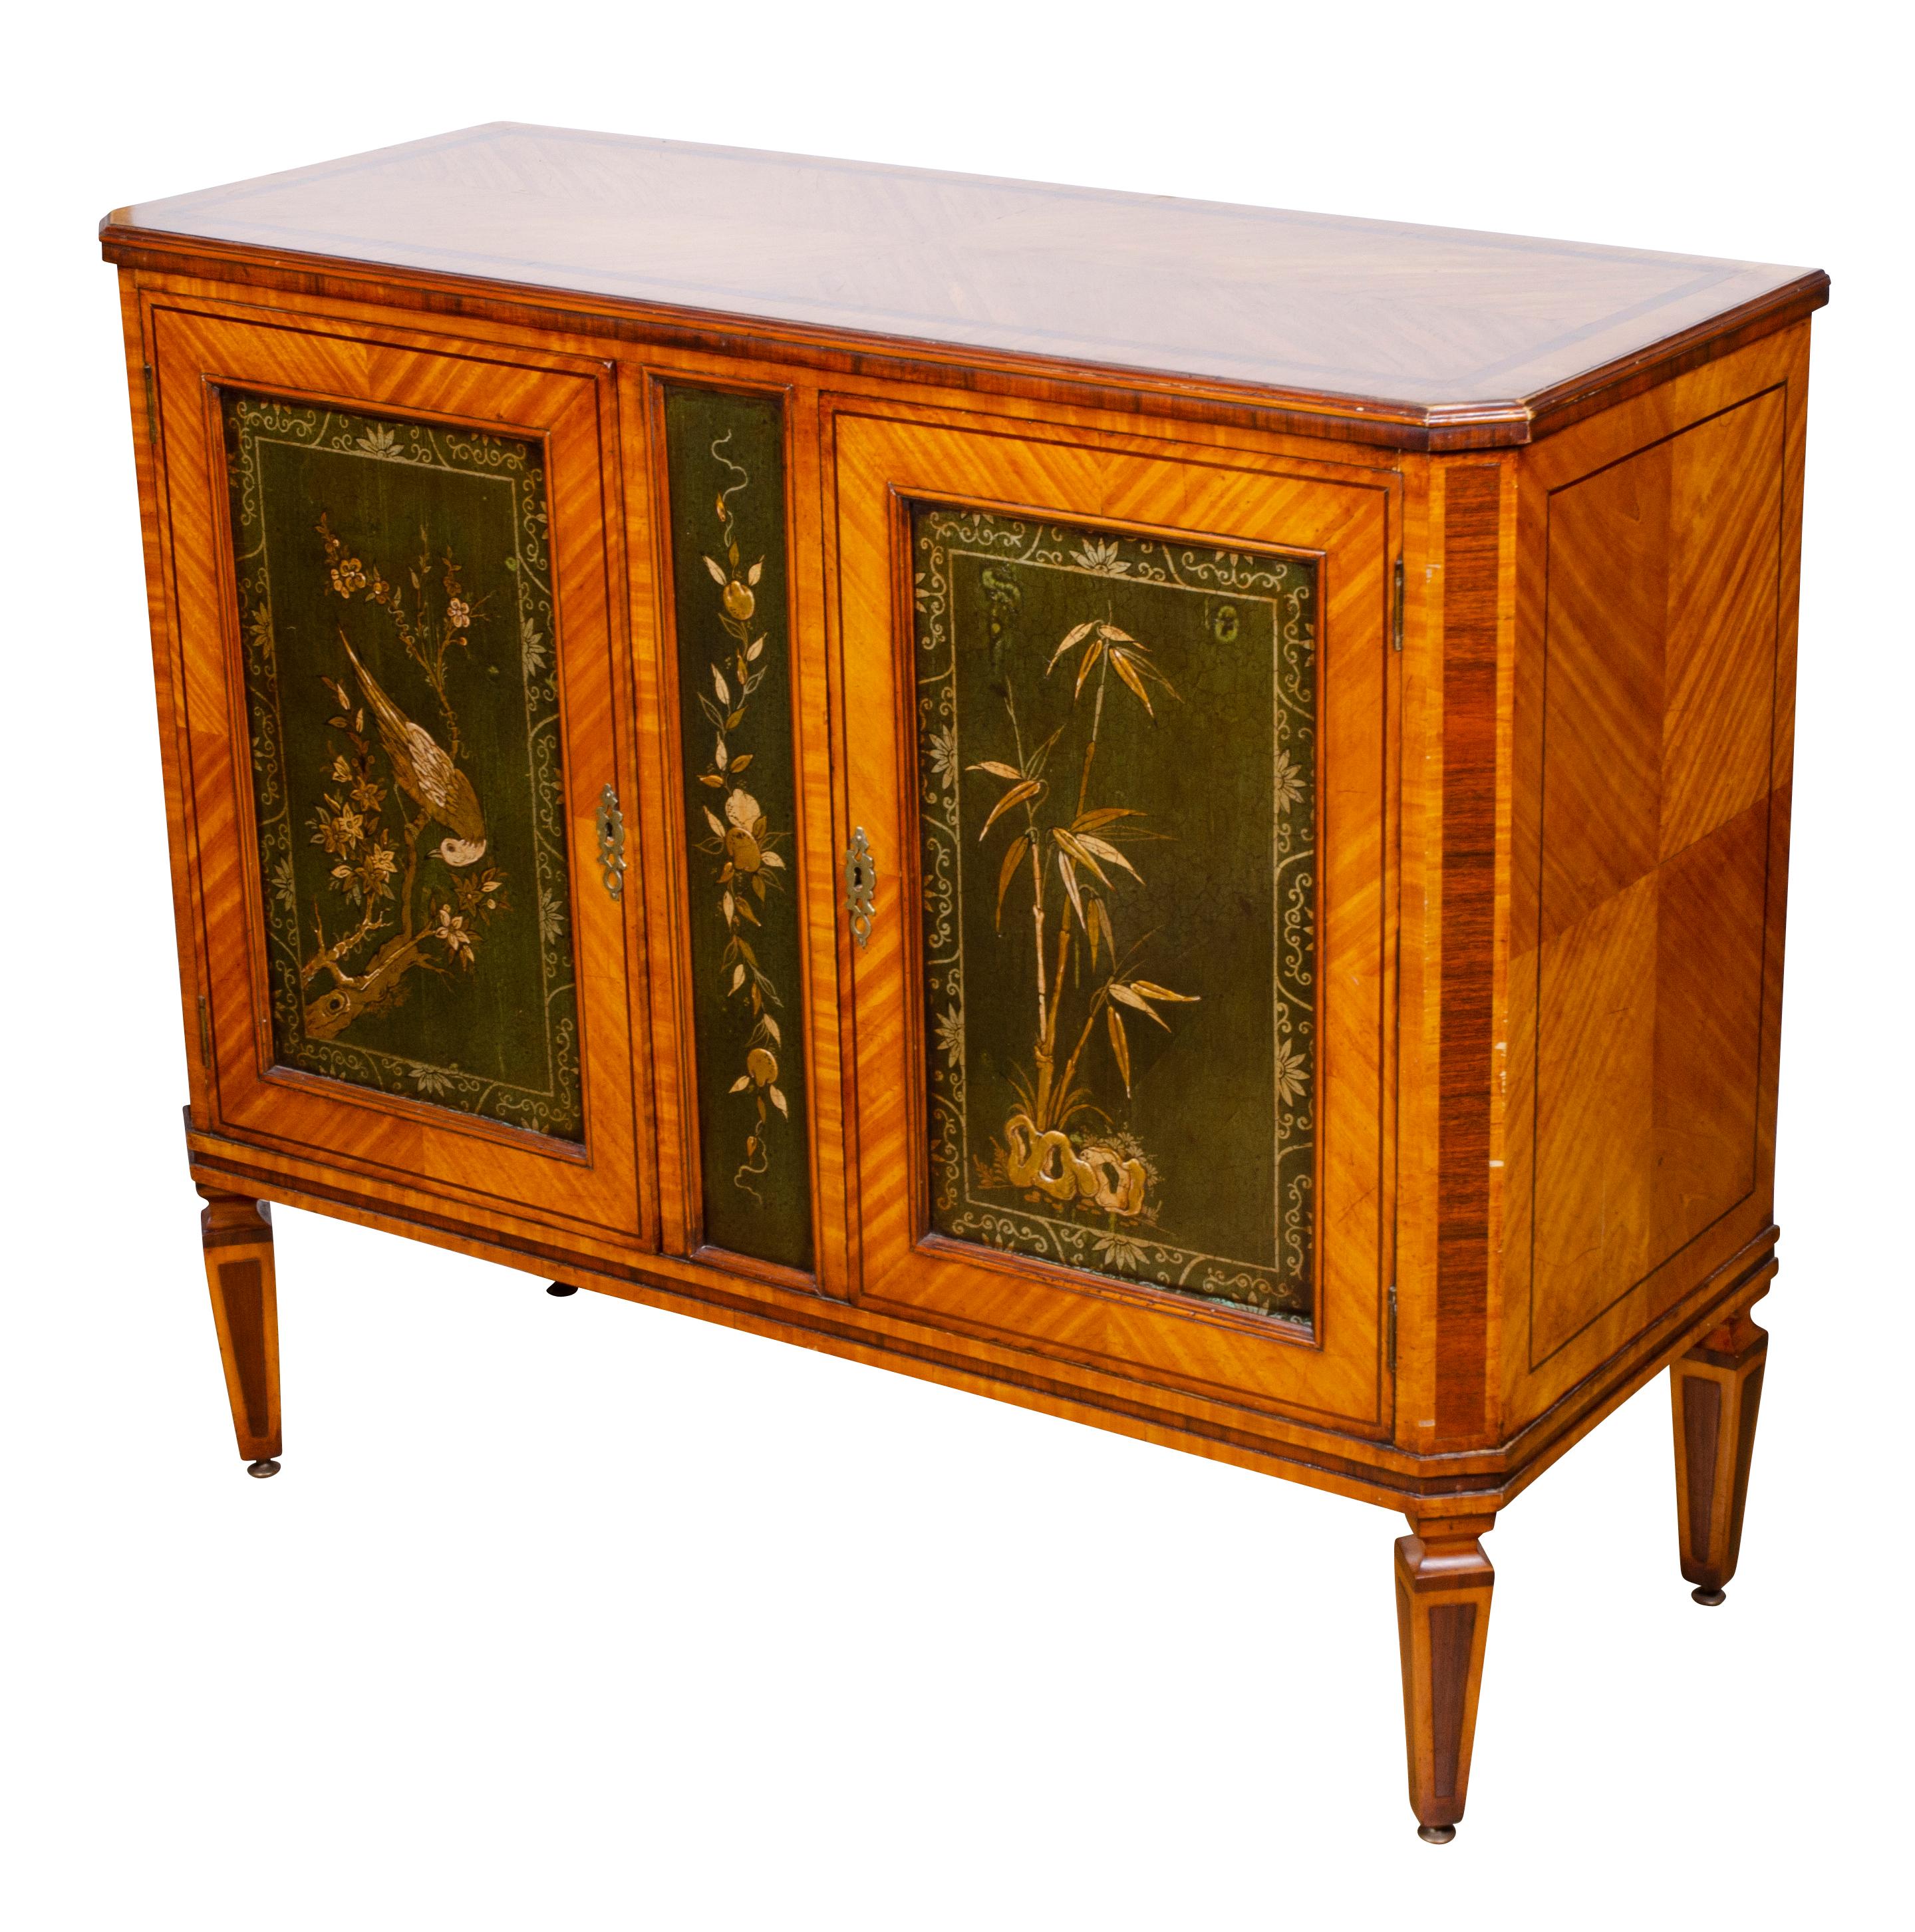 Neoclassical Revival Pair of Dutch Neoclassic Satinwood and Japanned Cabinets For Sale